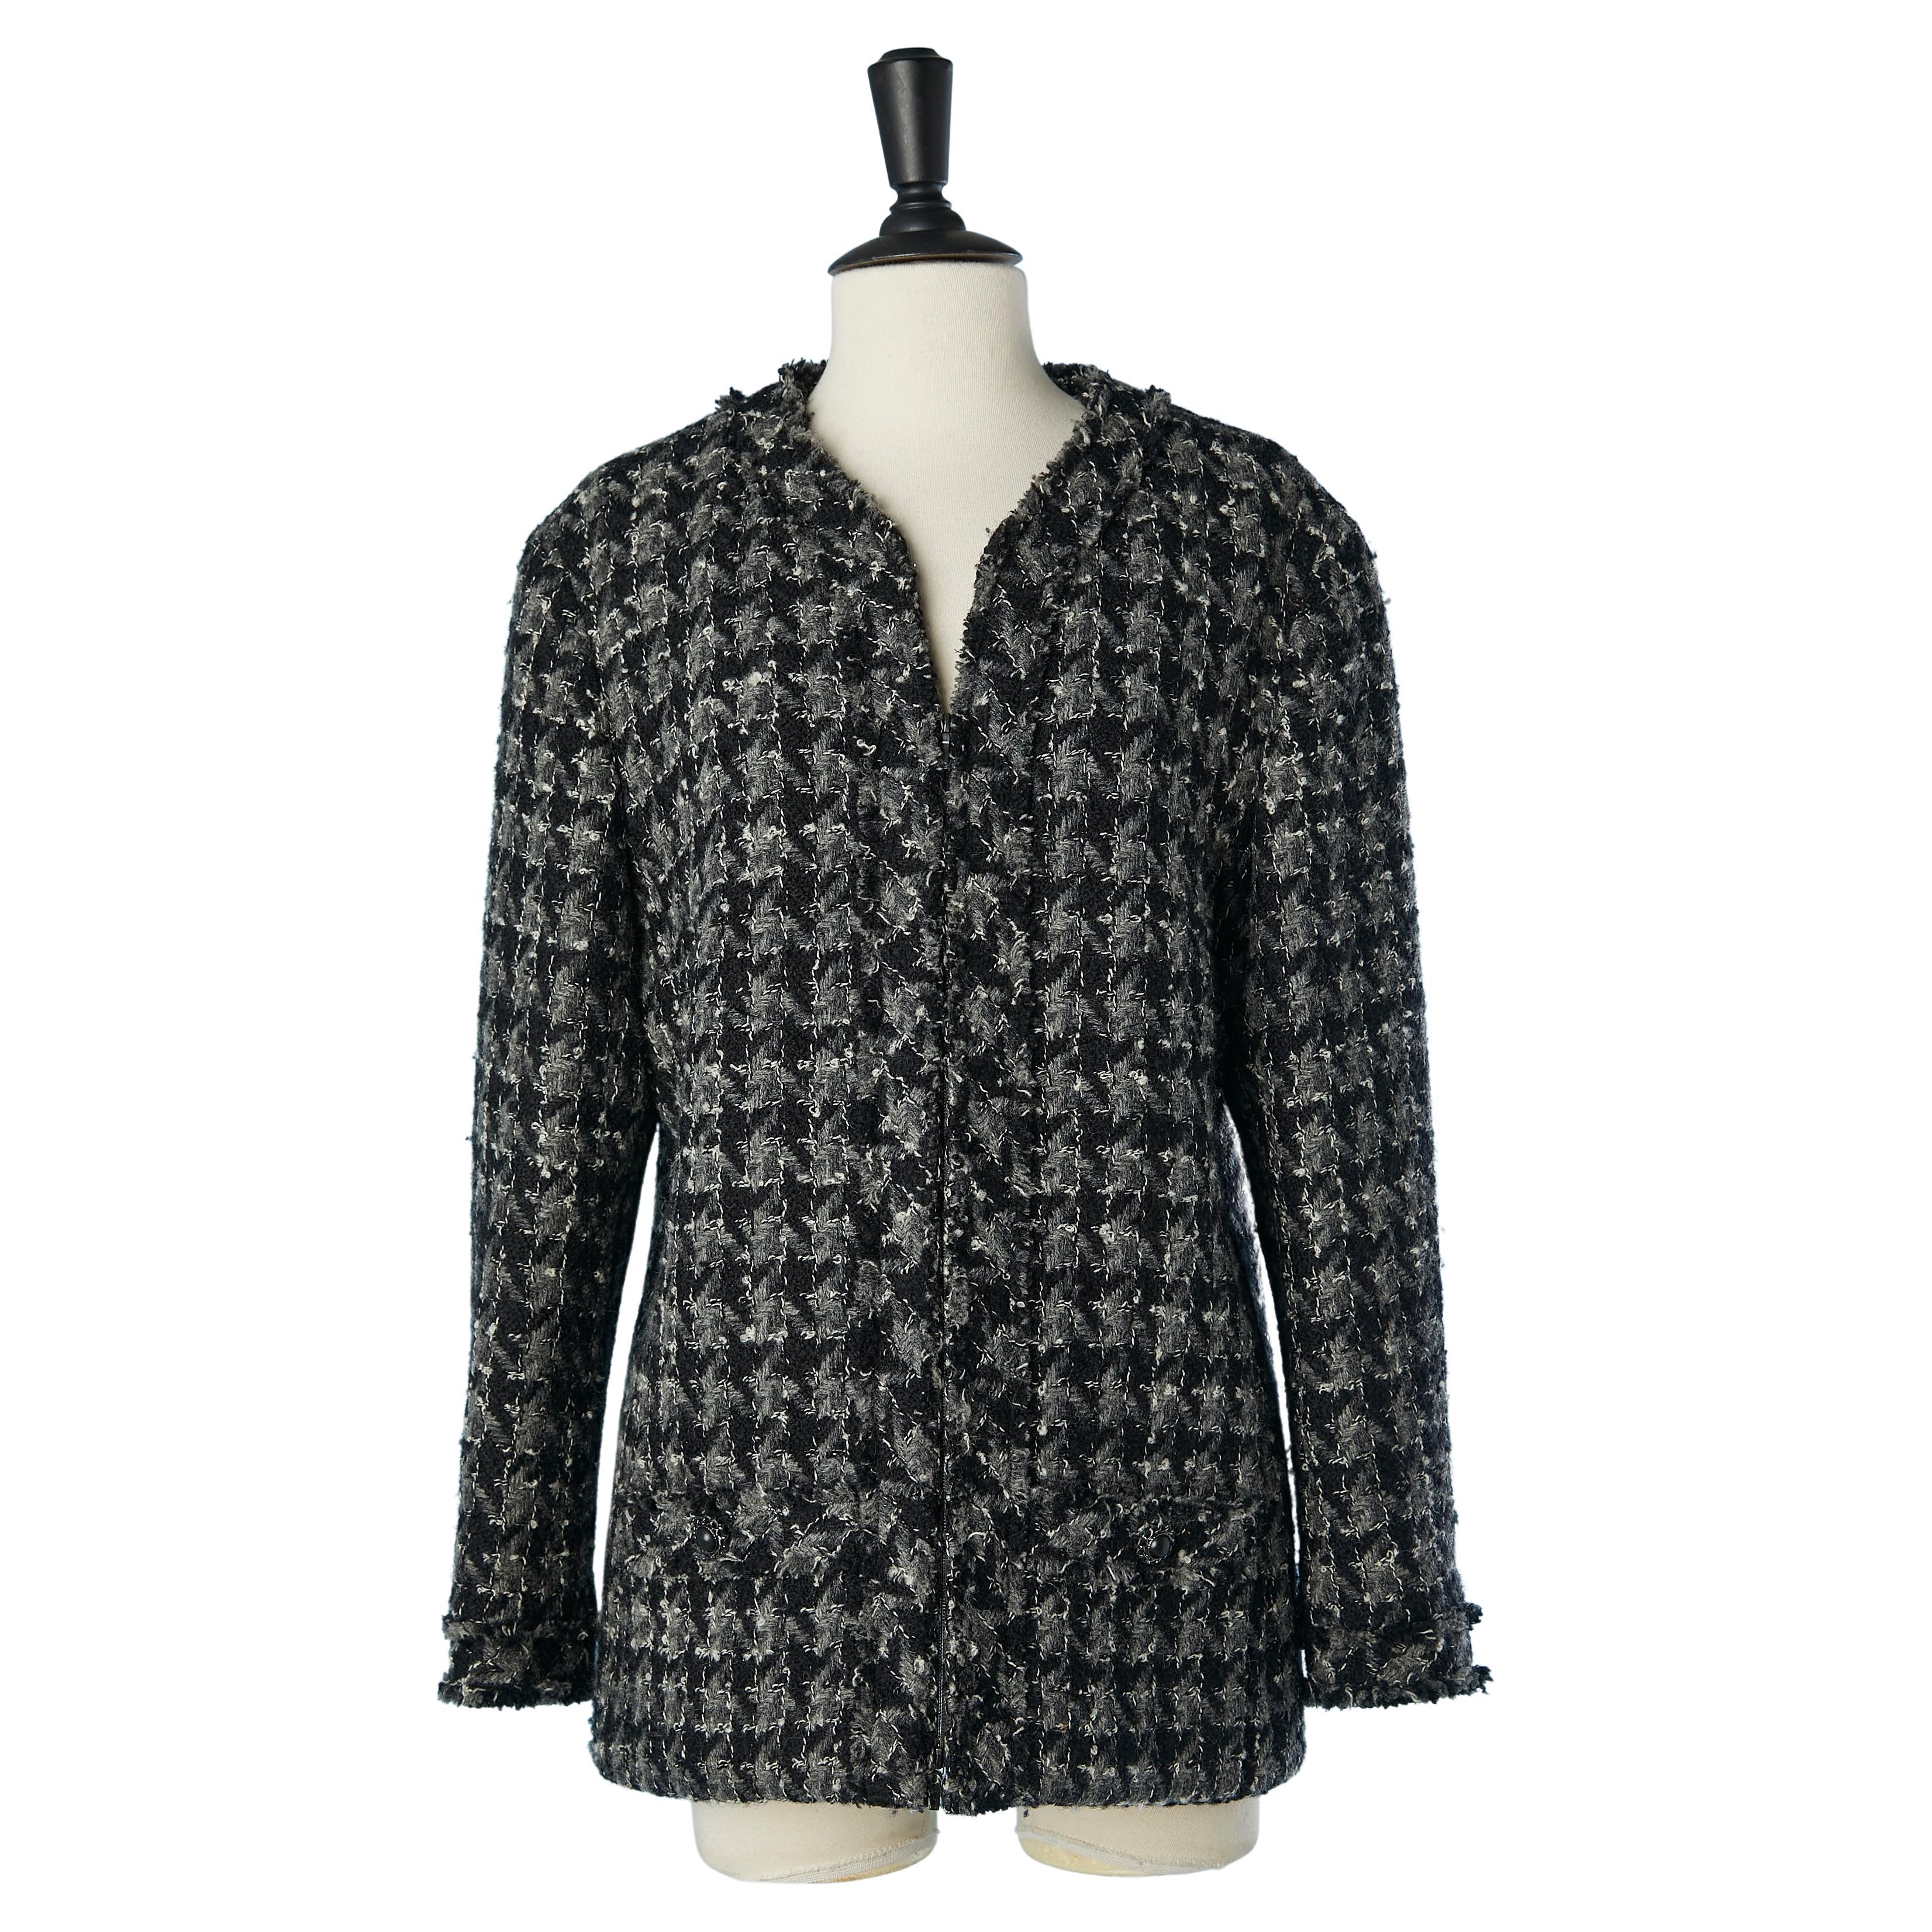 Grey and black tweed edge to edge jacket with houndstooth pattern ...